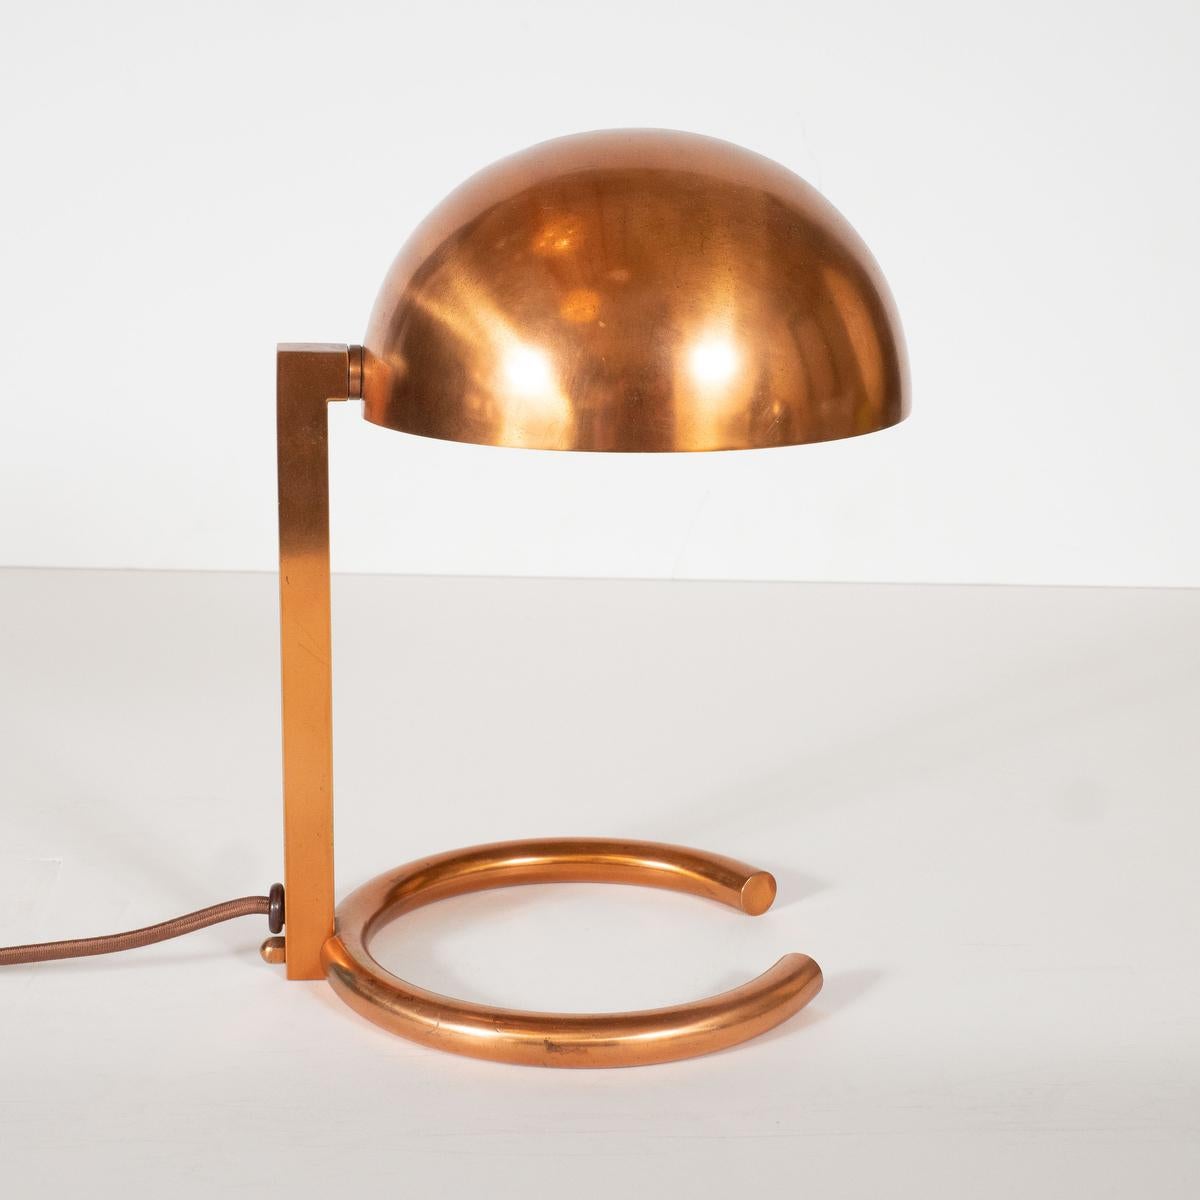 Rare Modernist style diminutive copper desk lamp with adjustable shade by Adnet.